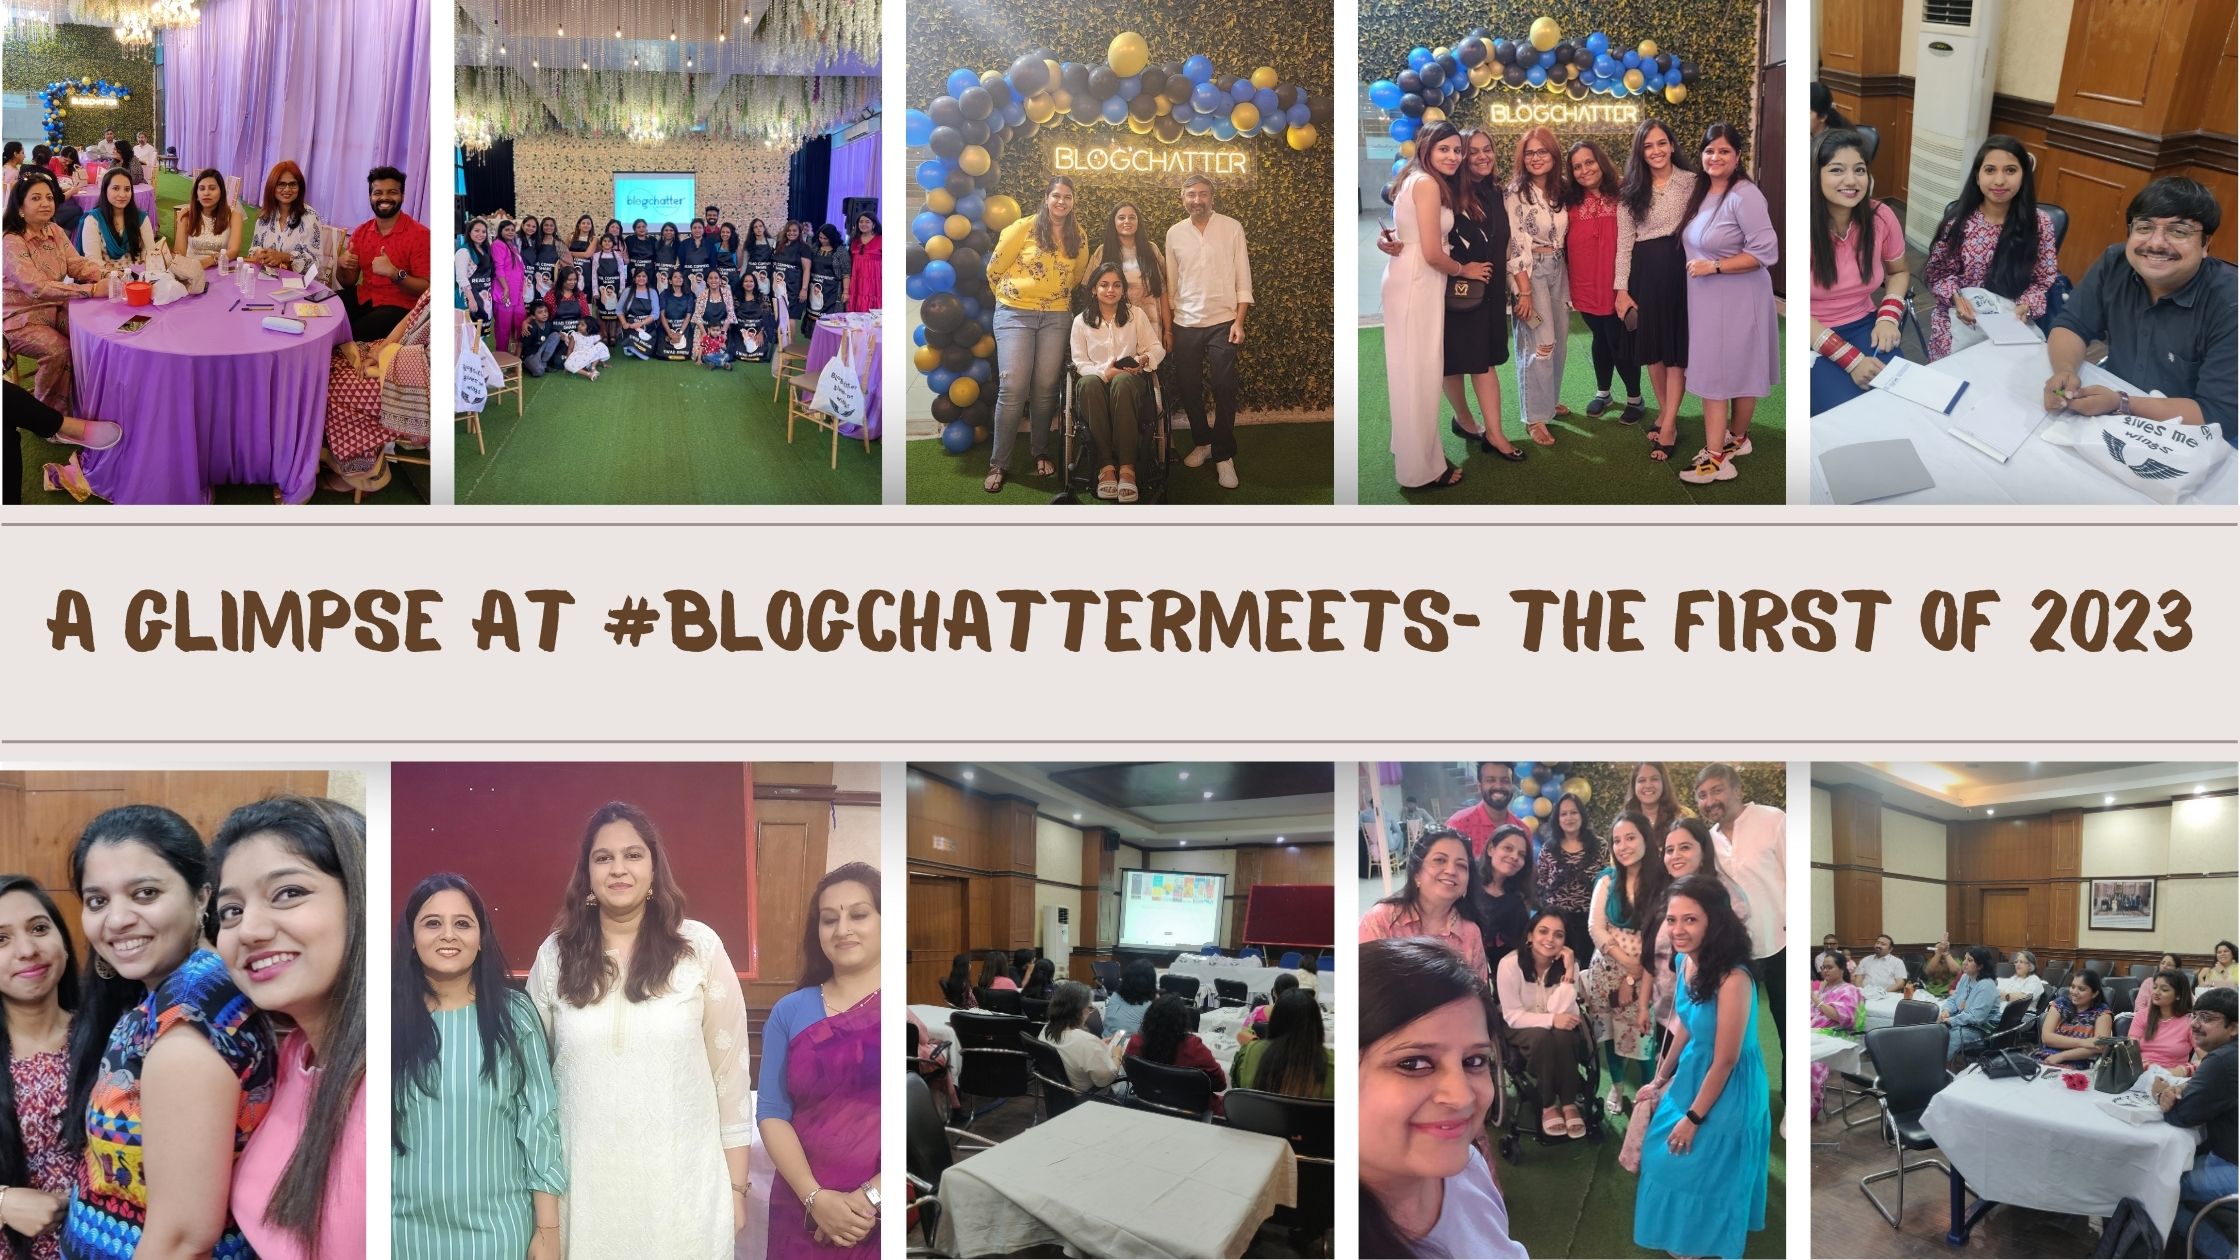 A glimpse at #BlogchatterMeets- the first of 2023